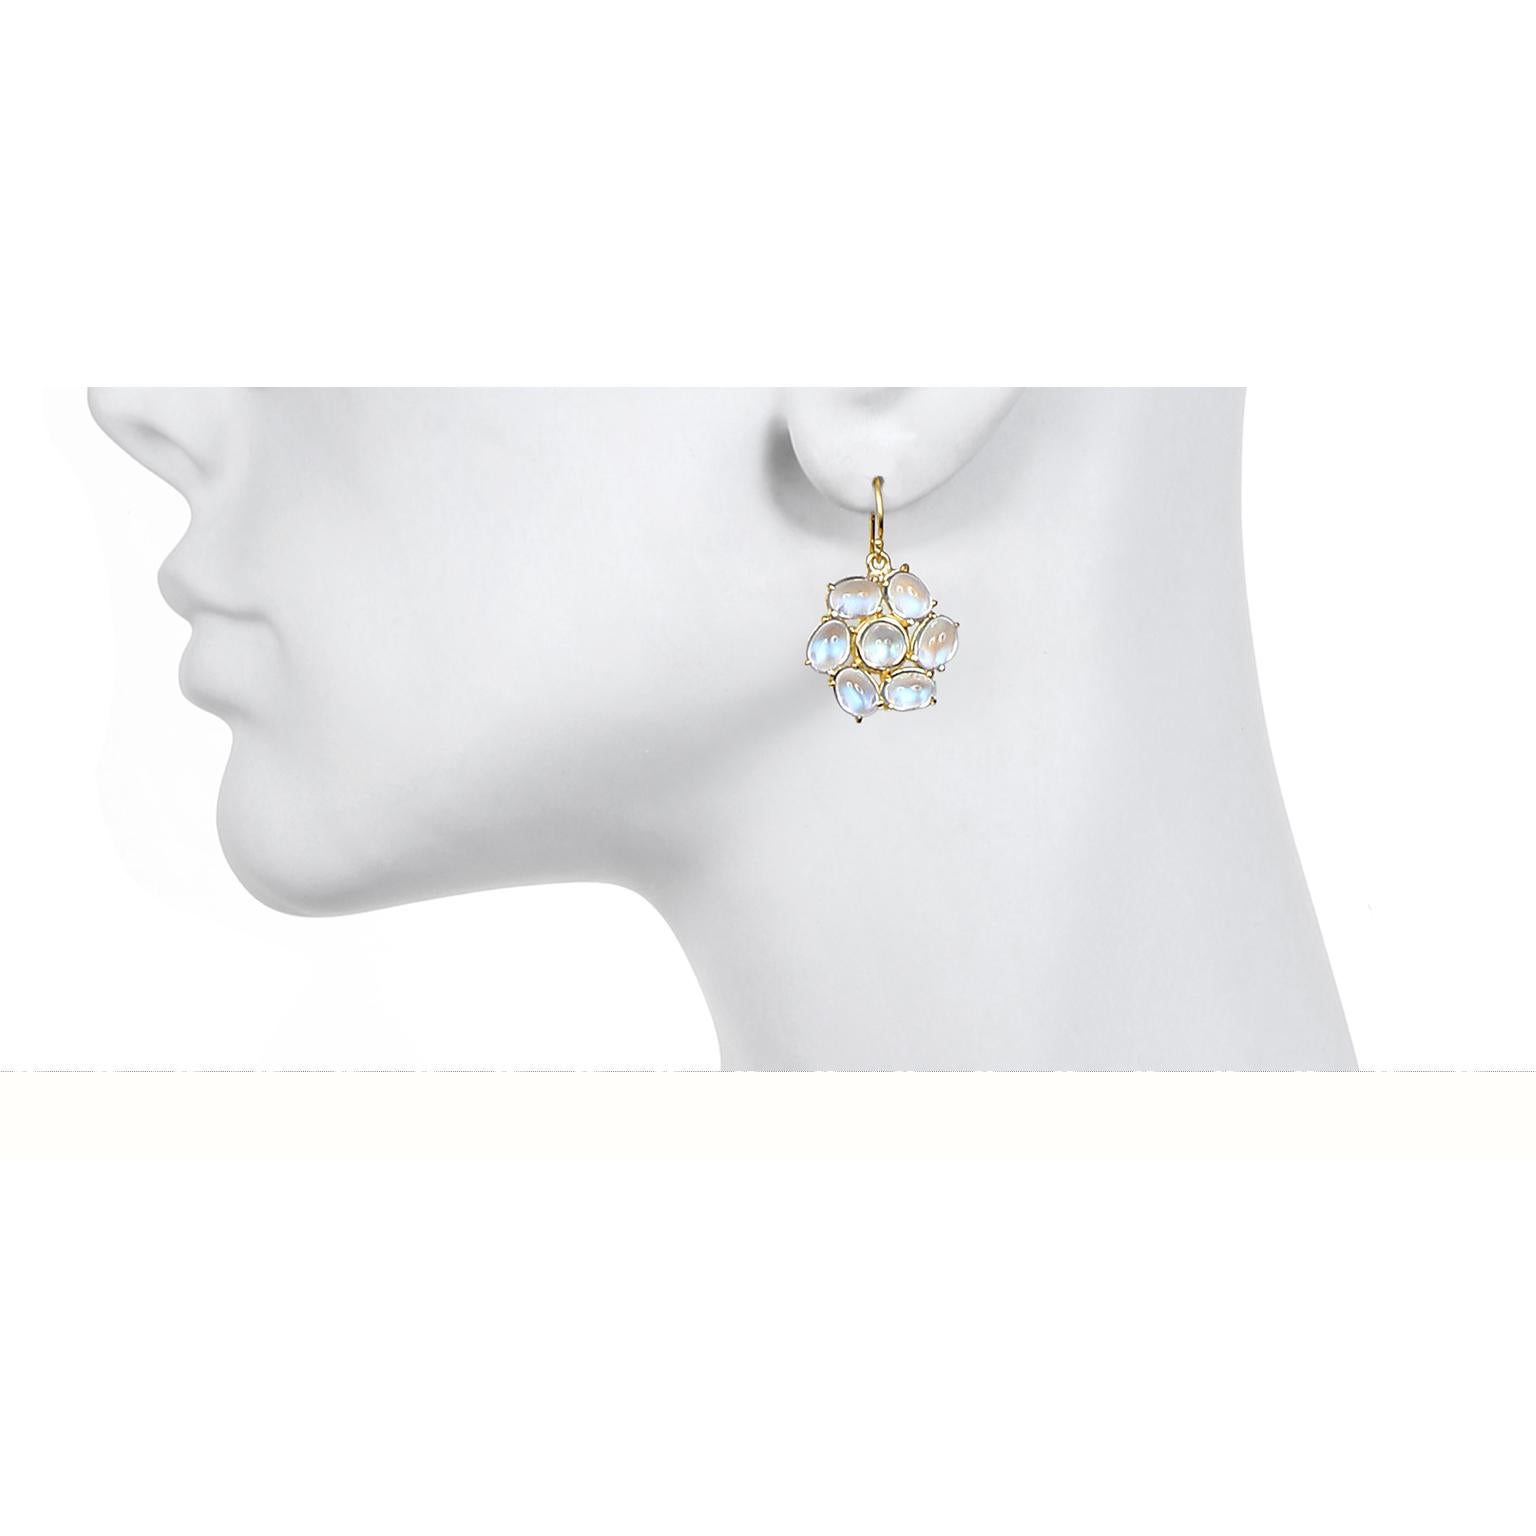 Even during broad daylight there will be a full moon glowing and emitting moonbeams from these beautiful 18k Gold Ceylon Moonstone Daisy Earrings.  Known for its adularescence, the inimitable blue flash from Ceylon moonstones adds to the overall